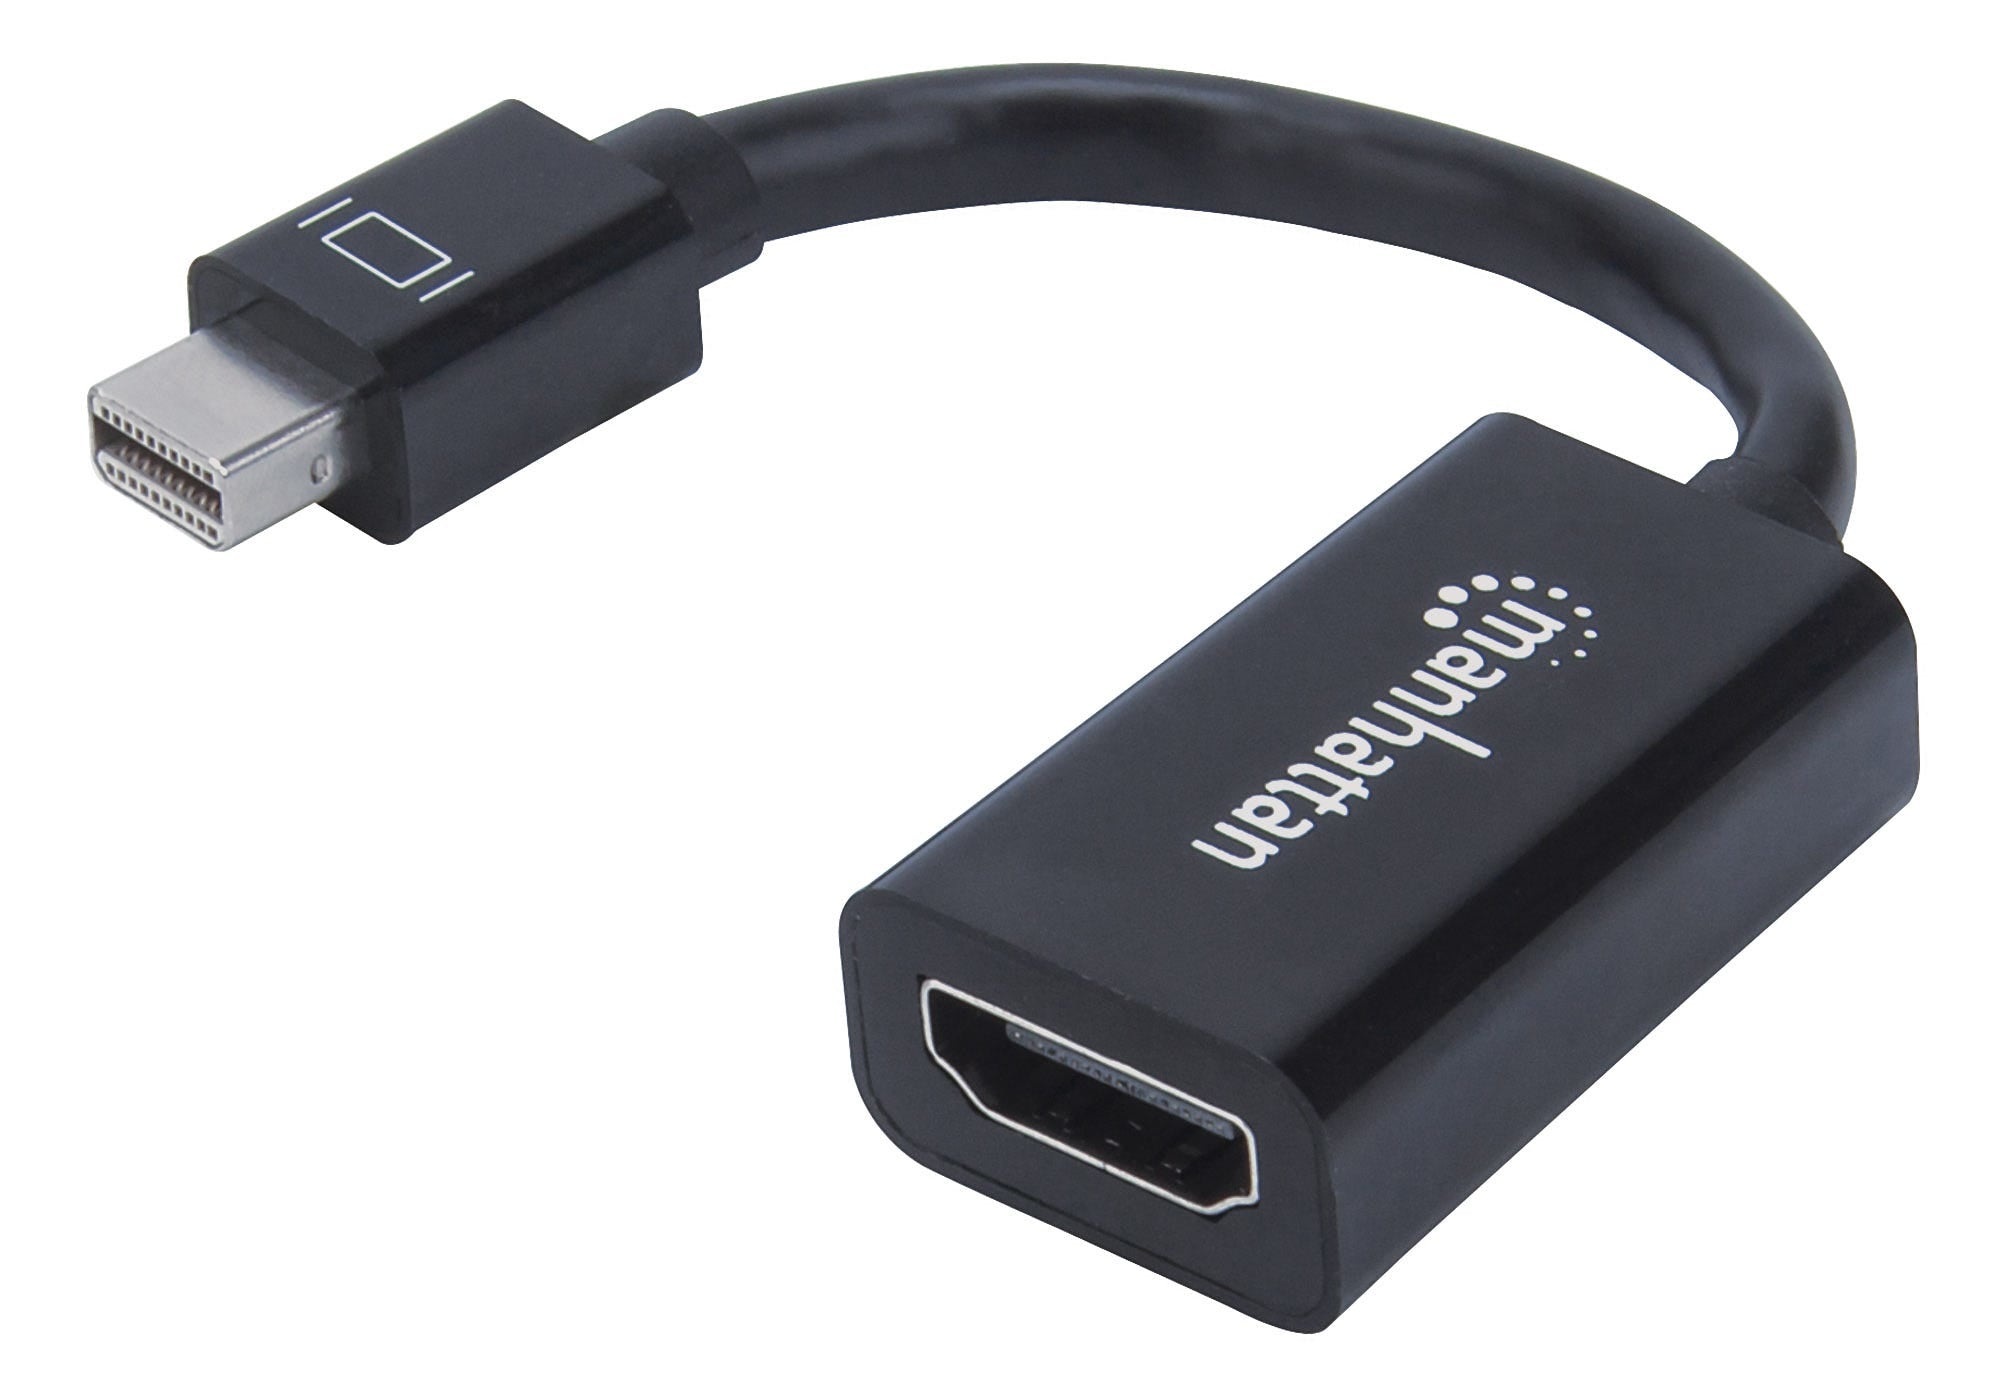 Manhattan Mini DisplayPort 1.2 to HDMI Adapter Cable, 1080p@60Hz, 12cm, Male to Female, Black, Equivalent to MDP2HDMI, Three Year Warranty, Polybag